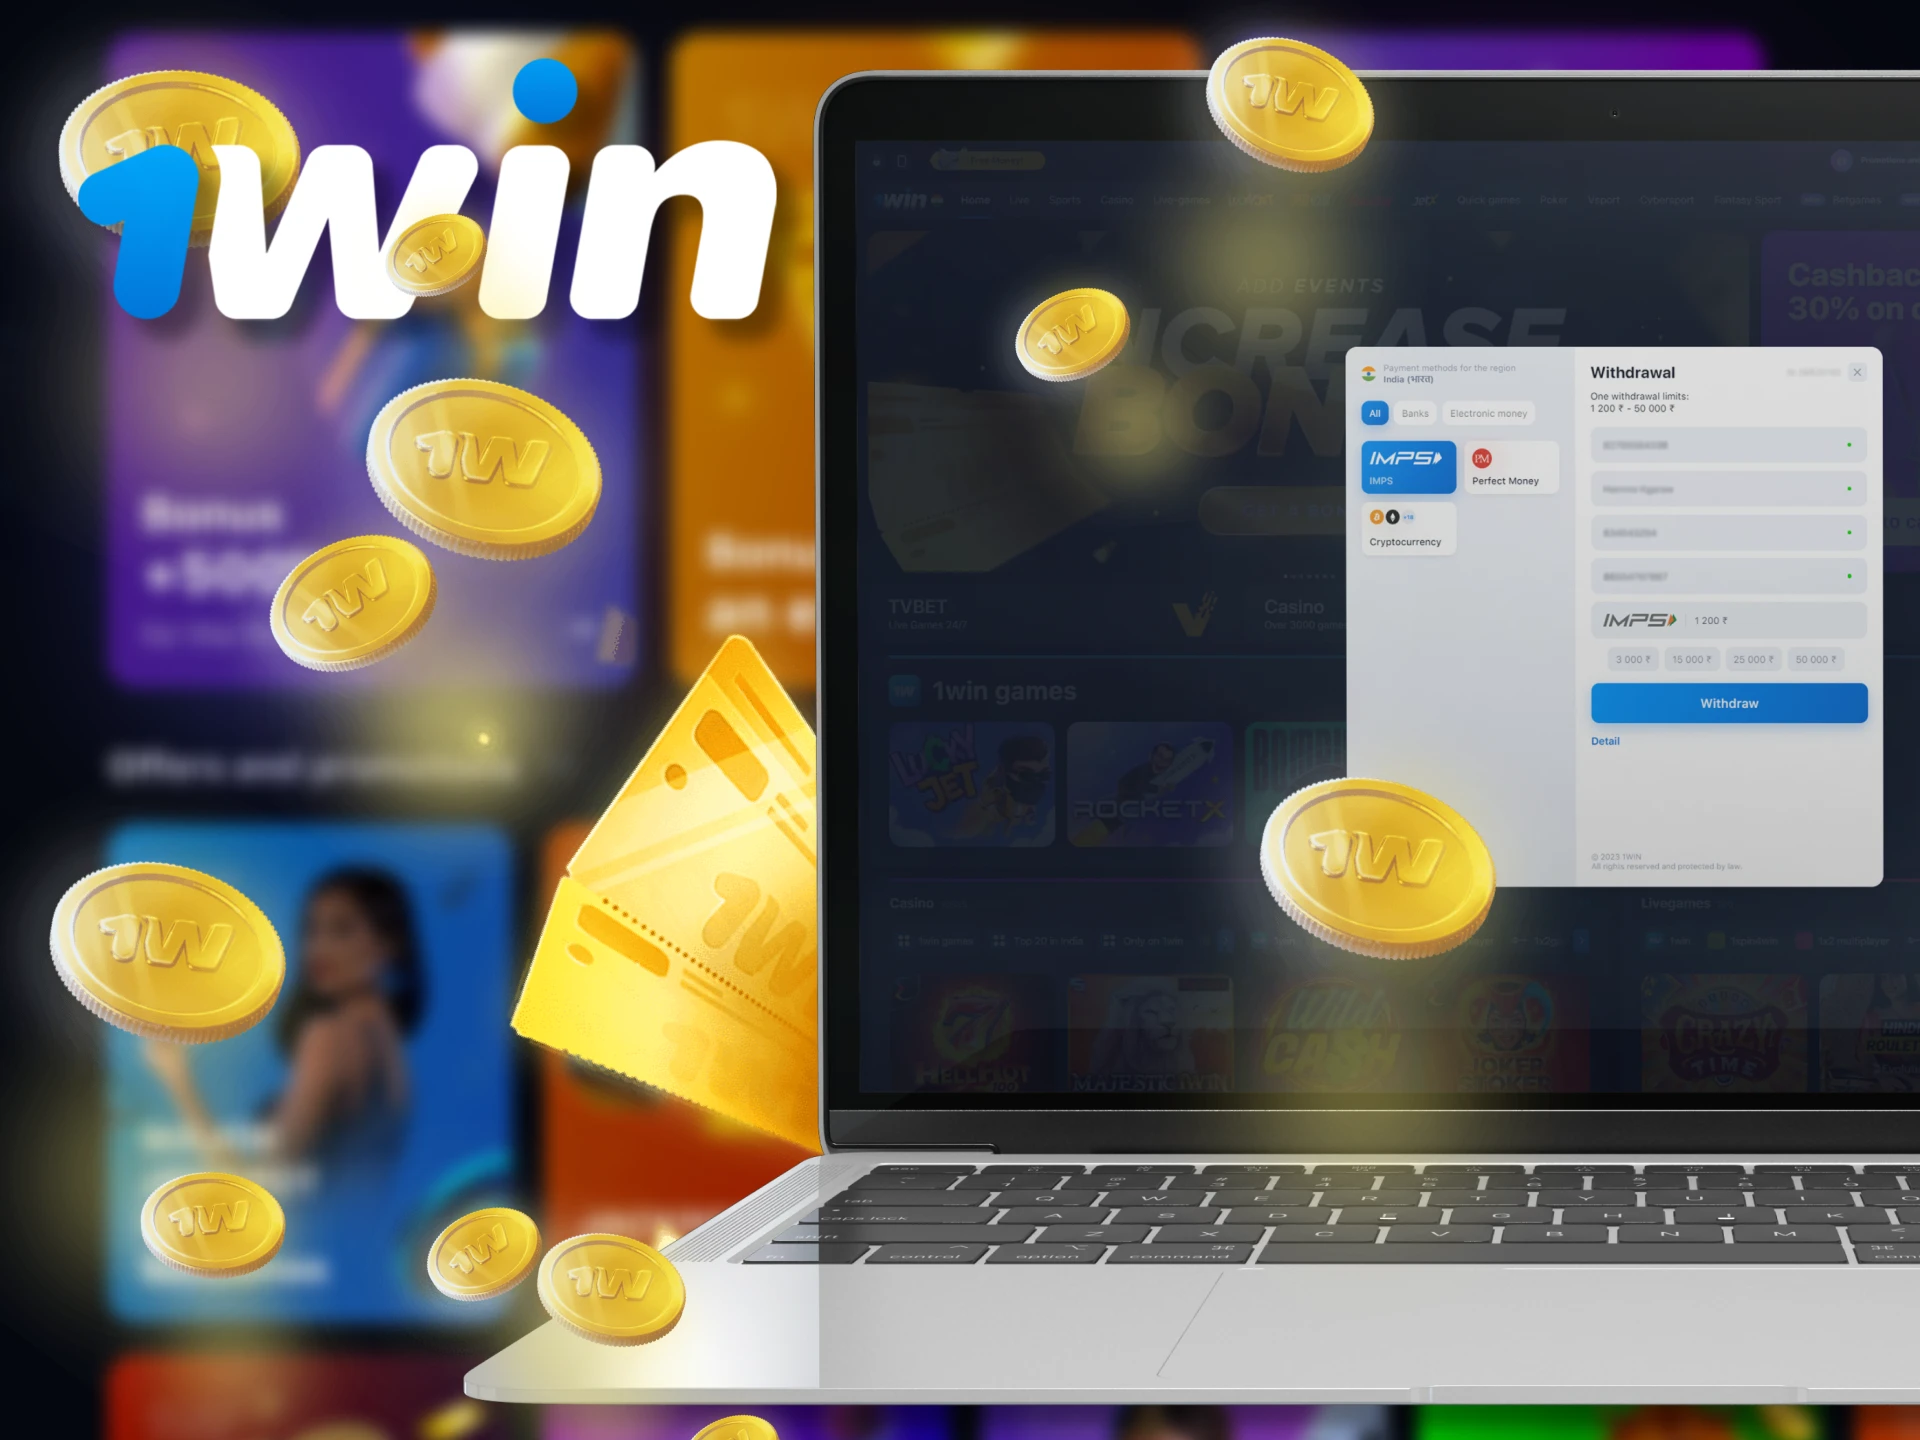 You must verify your account and wager the bonus to be able to withdraw the 1win bonus.